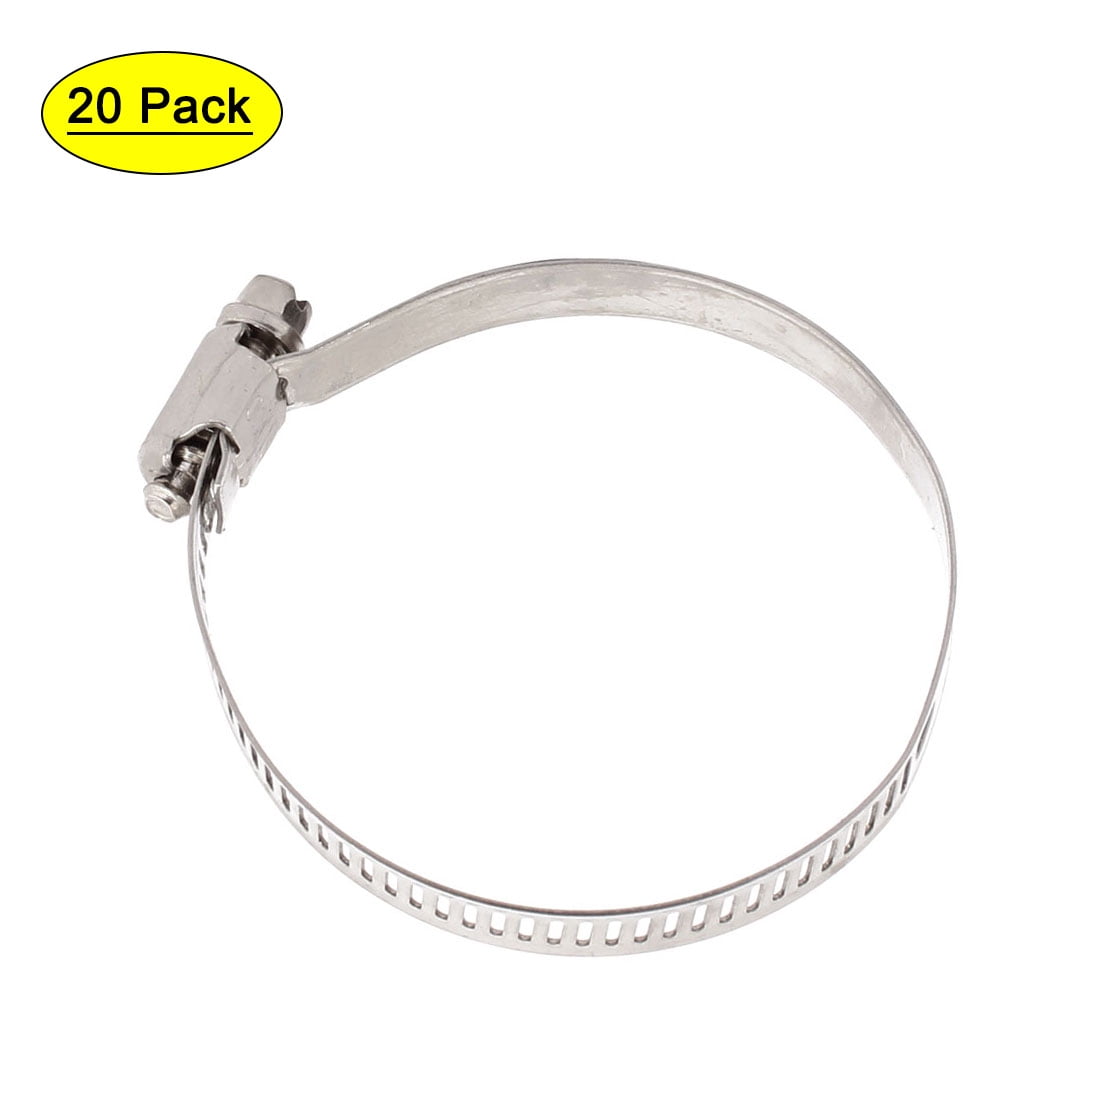 Stainless steel screw worm gear hose clamp safety end caps guards by CLAMP-AID